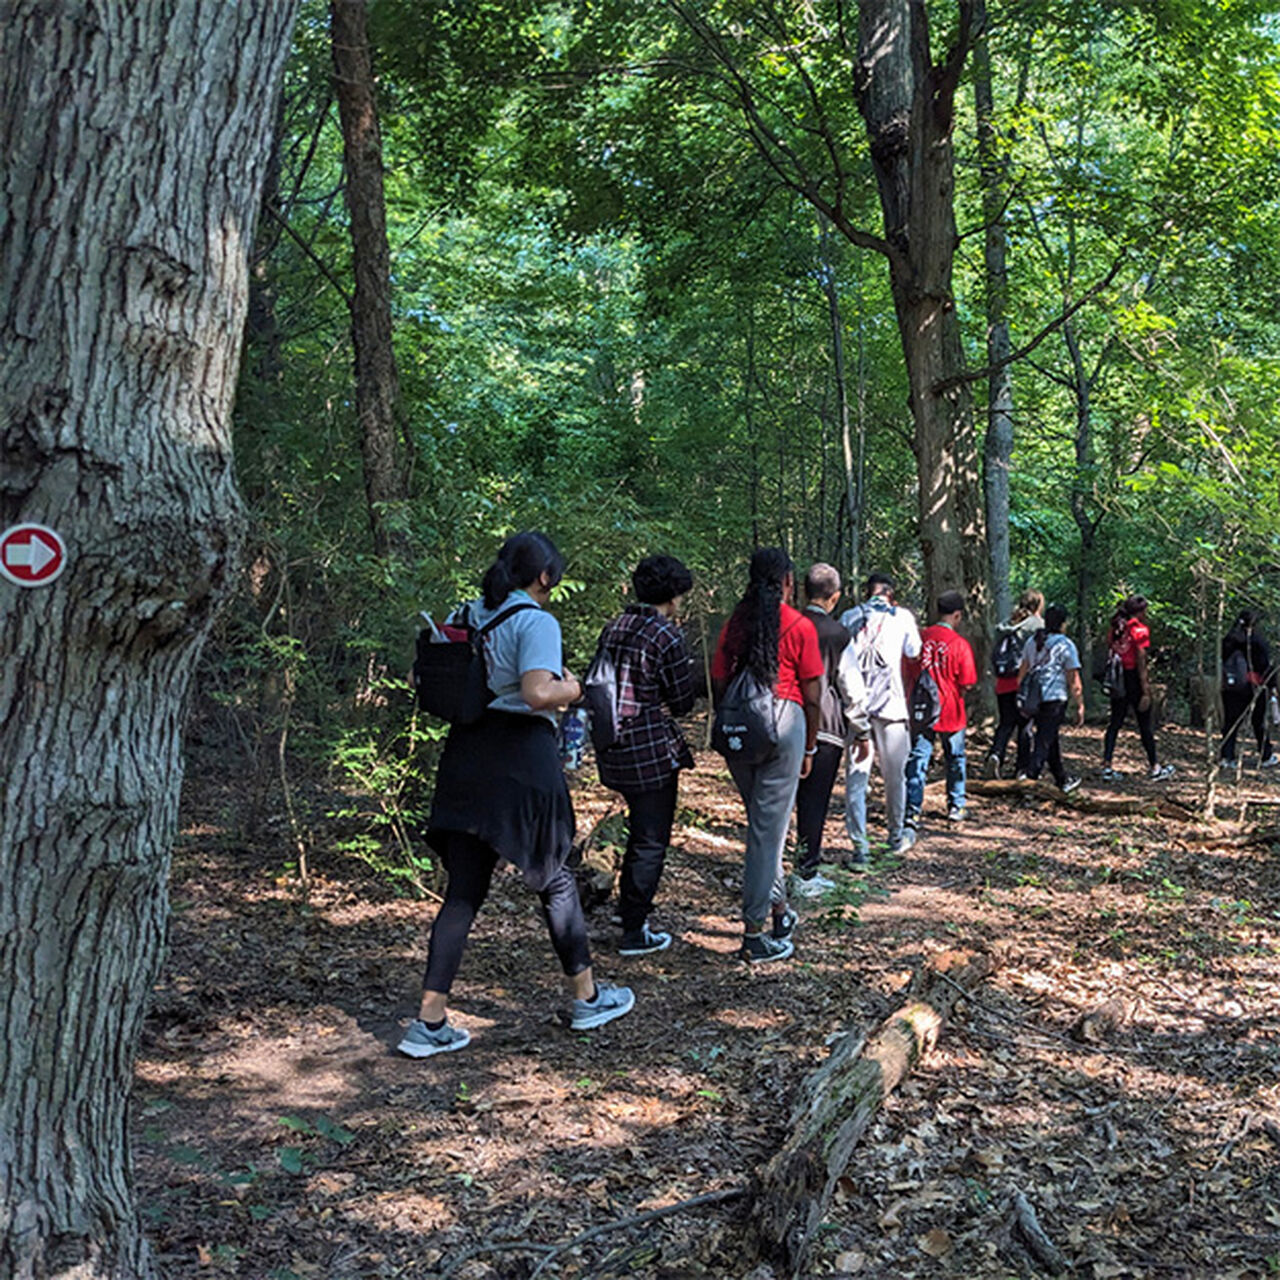 A group of students hiking with backpacks through the Helyar Woods image number 0